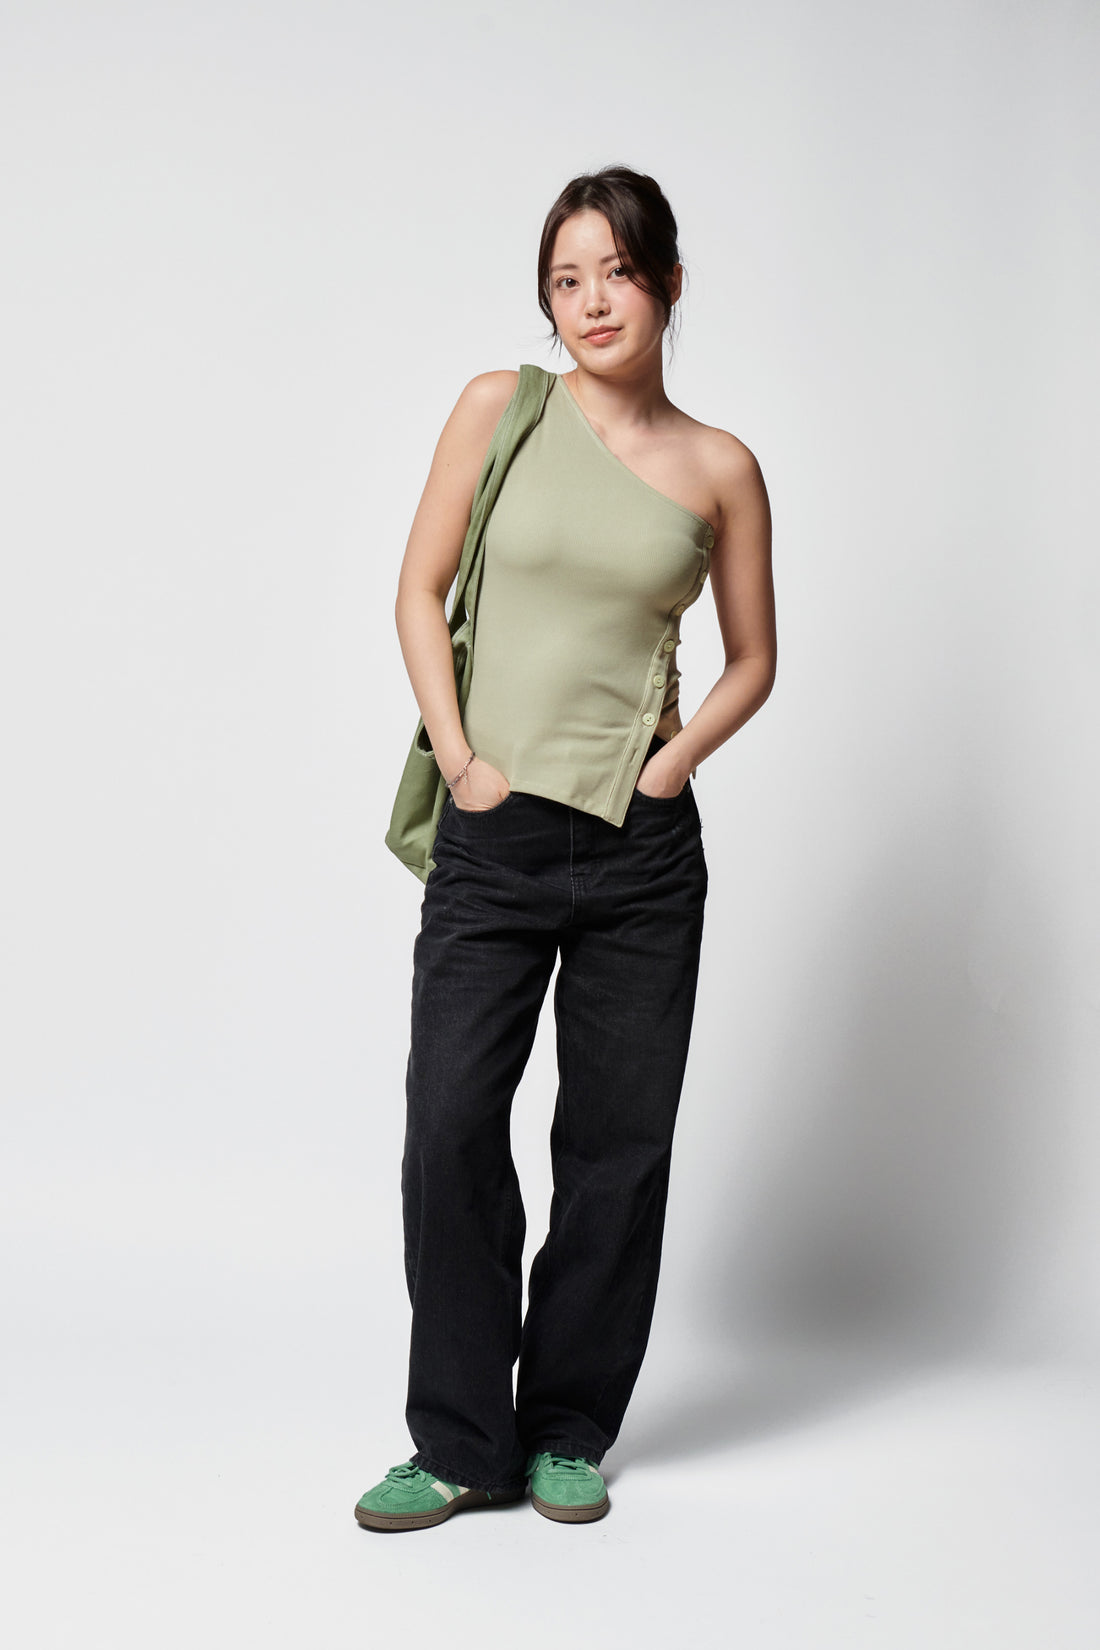 Kaia One Shoulder Tank + Green - Little Puffy